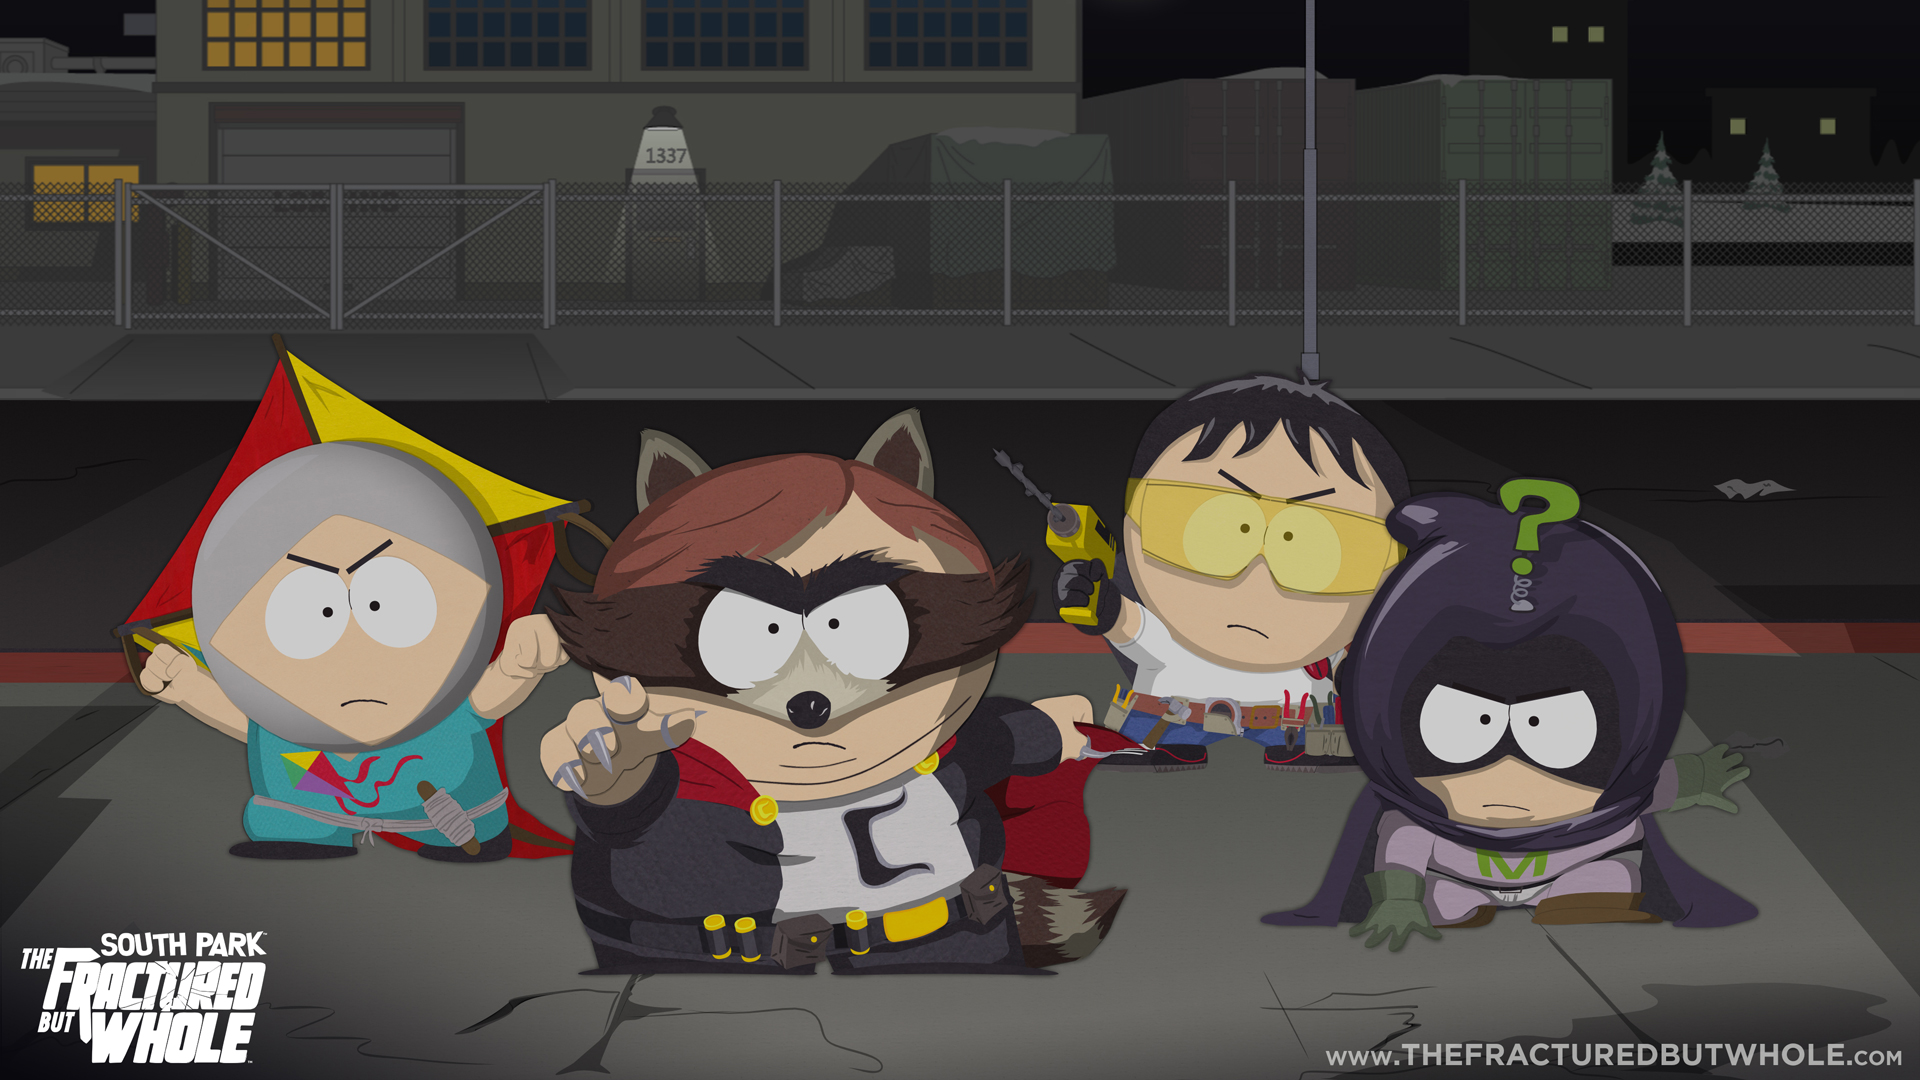 South Park Fractured But Whole Posters - HD Wallpaper 